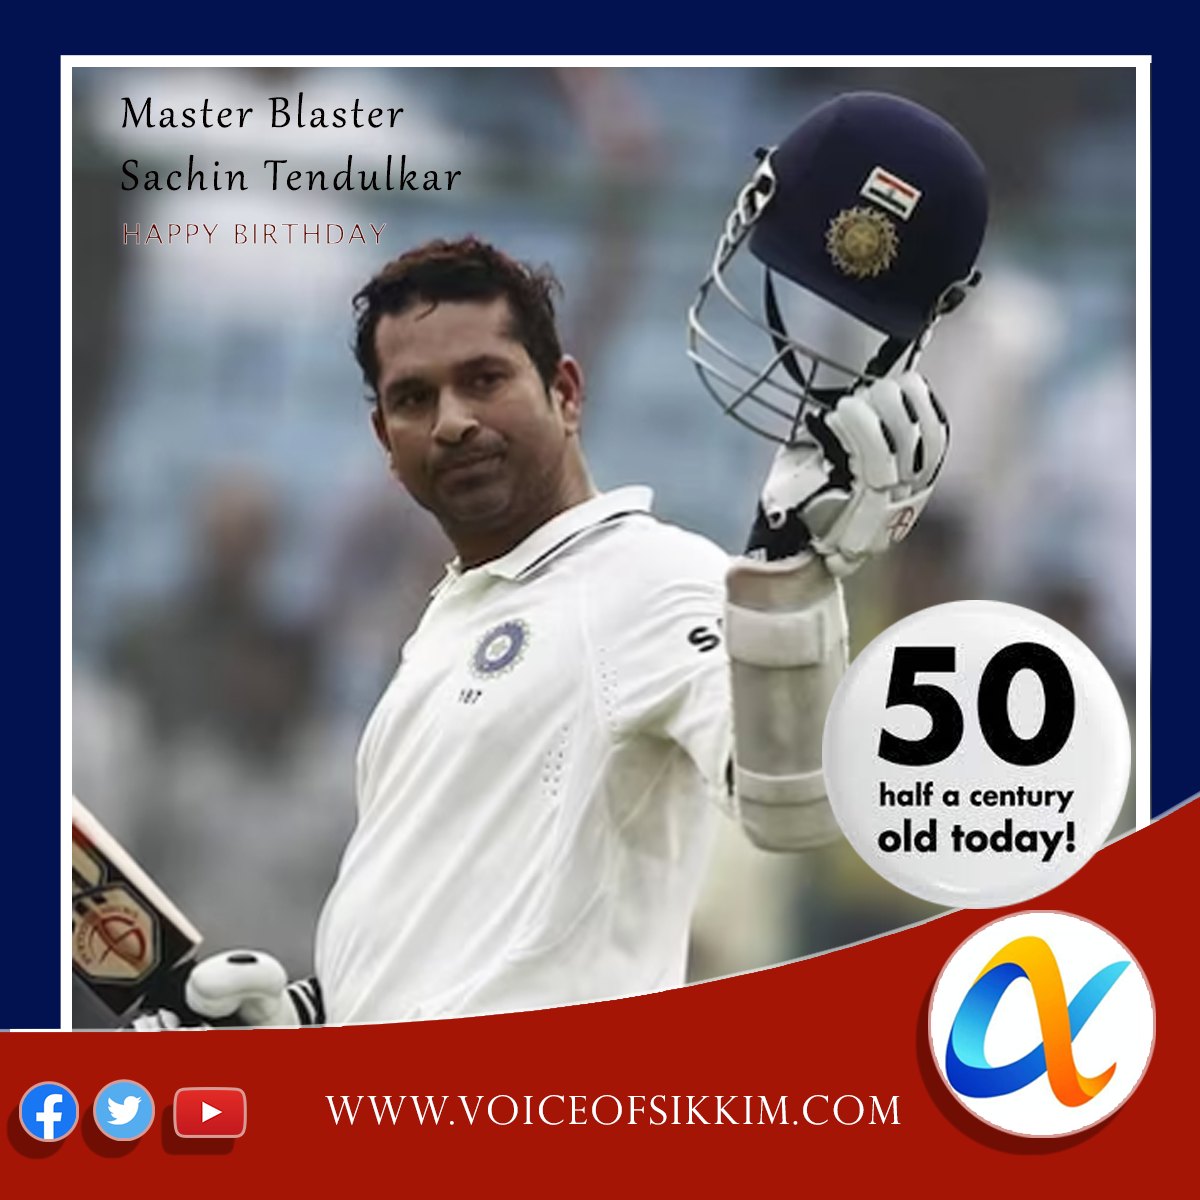 Master Blaster Turns 50, Here’re Memorable 50 Facts